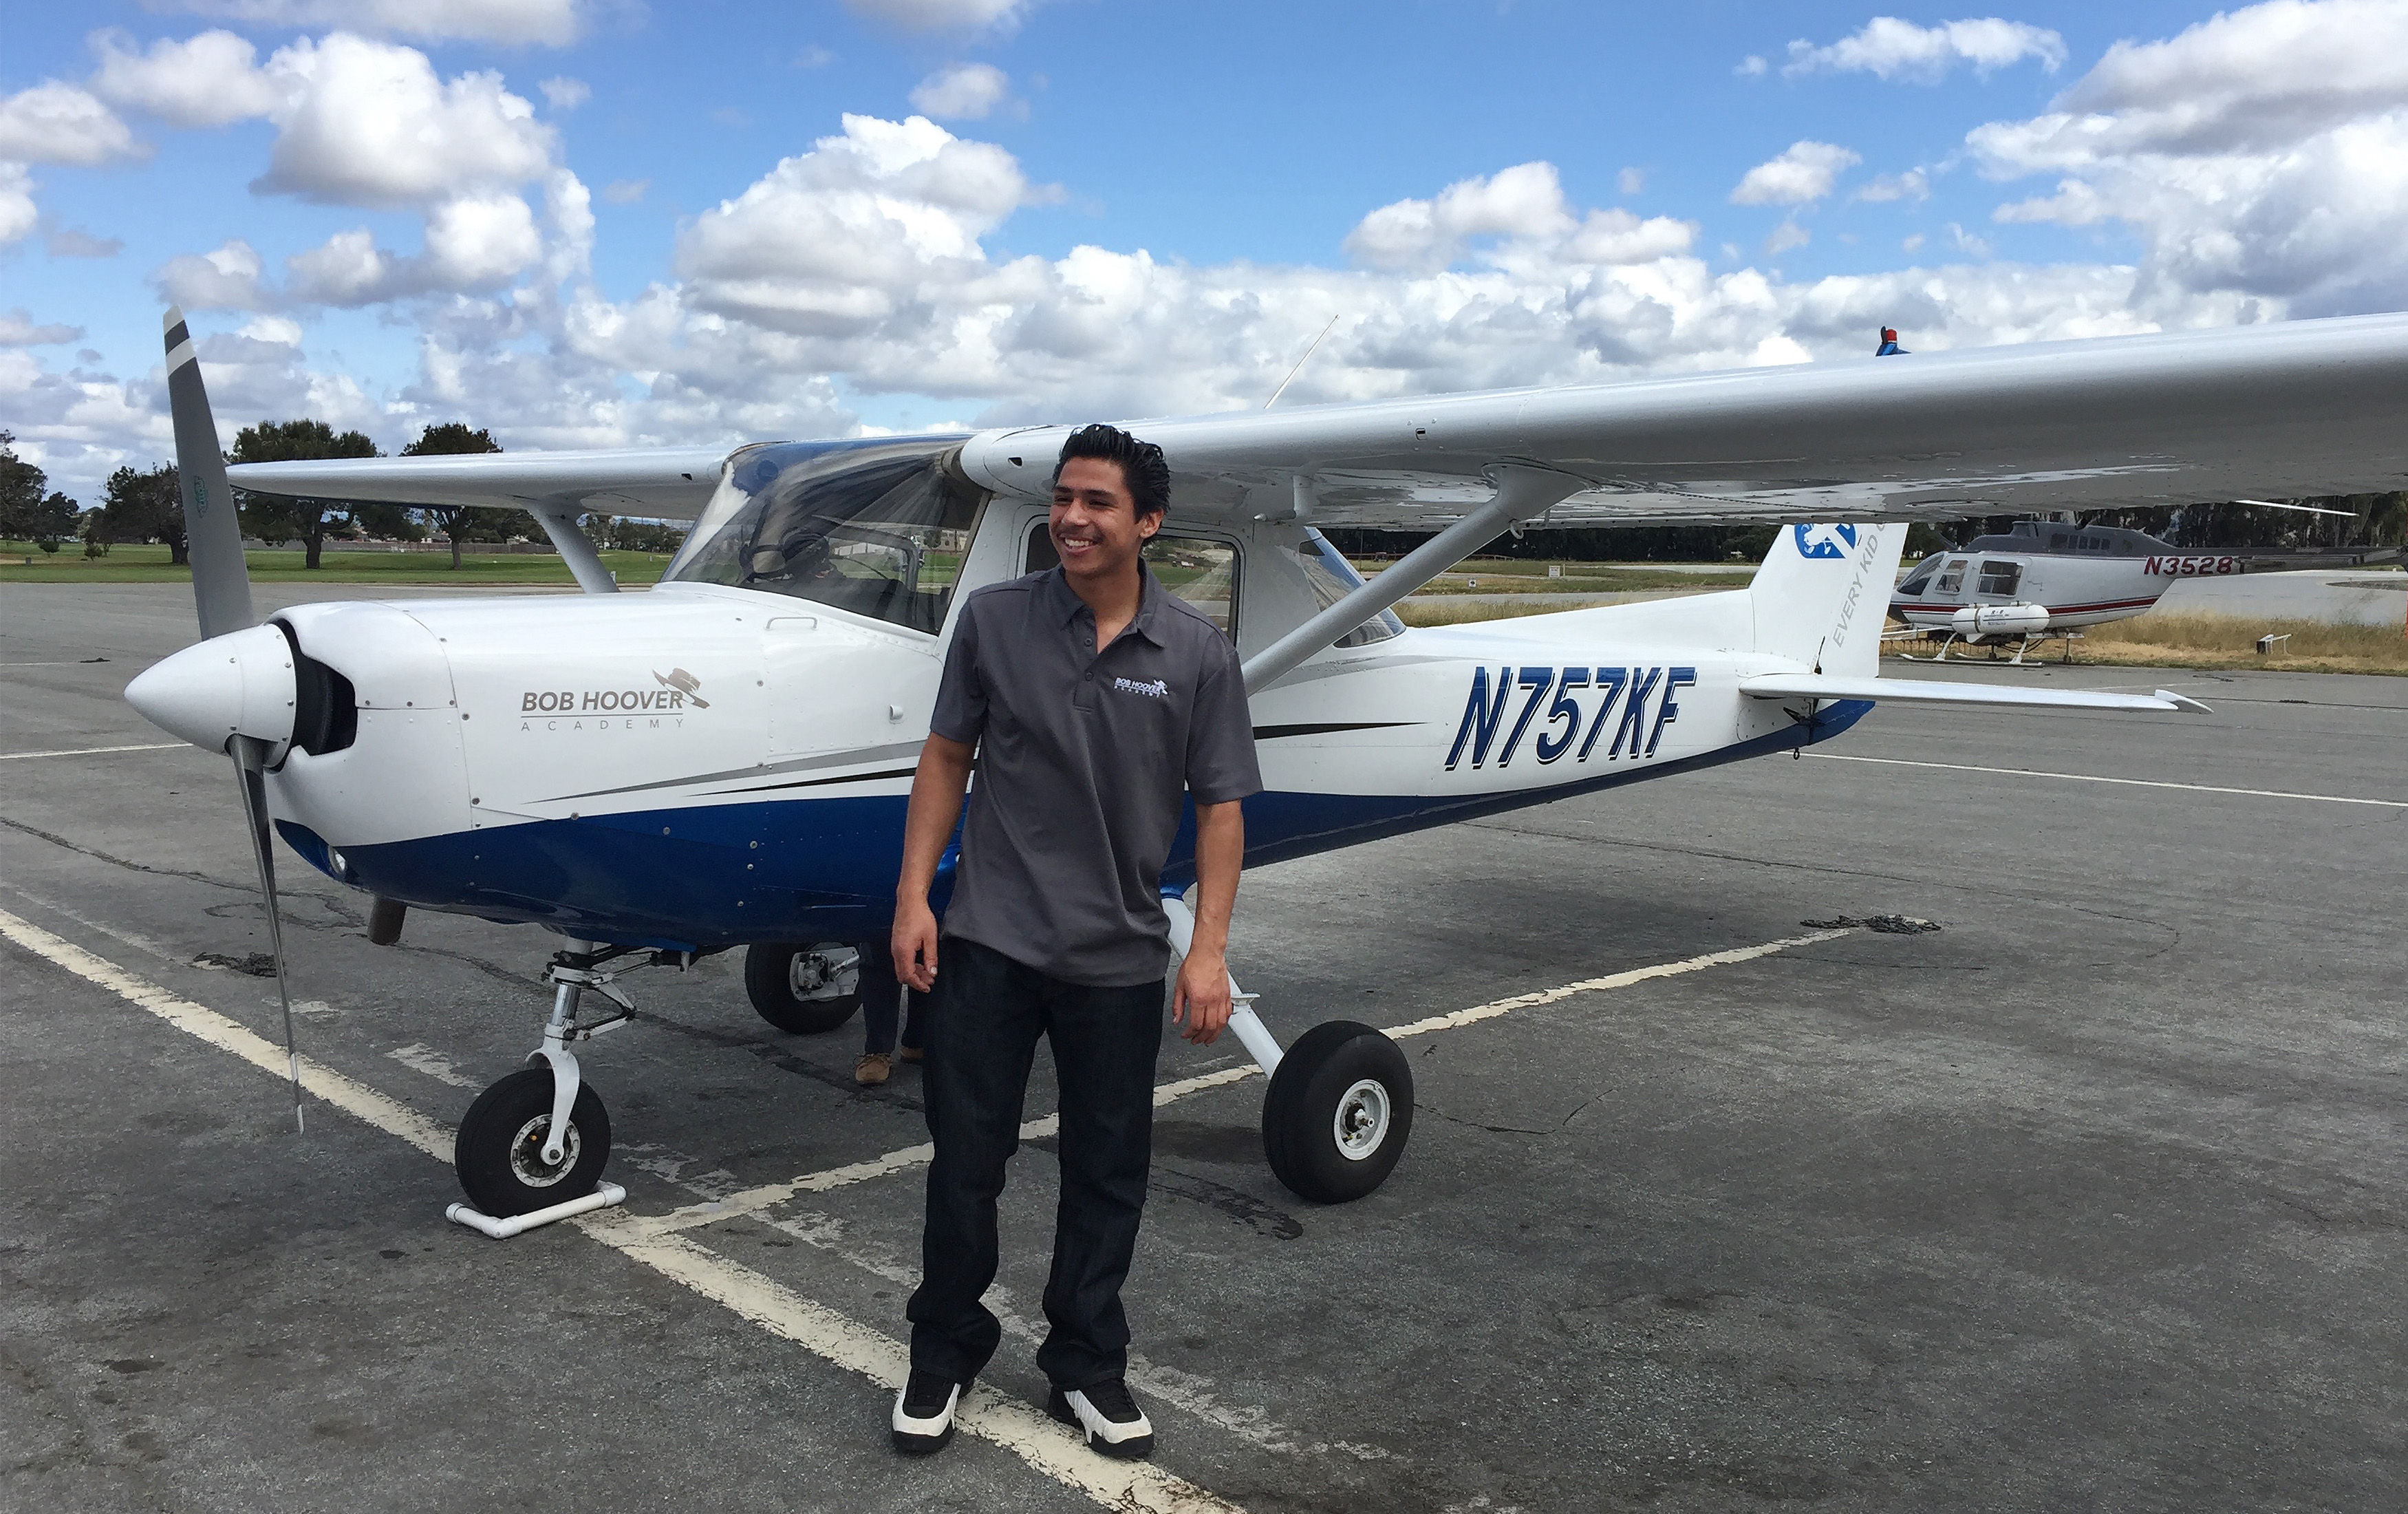 Bob Hoover Academy high school student Diego Merida smiles after his solo in the school's Cessna 152. Photo courtesy of Stacey Wilson.